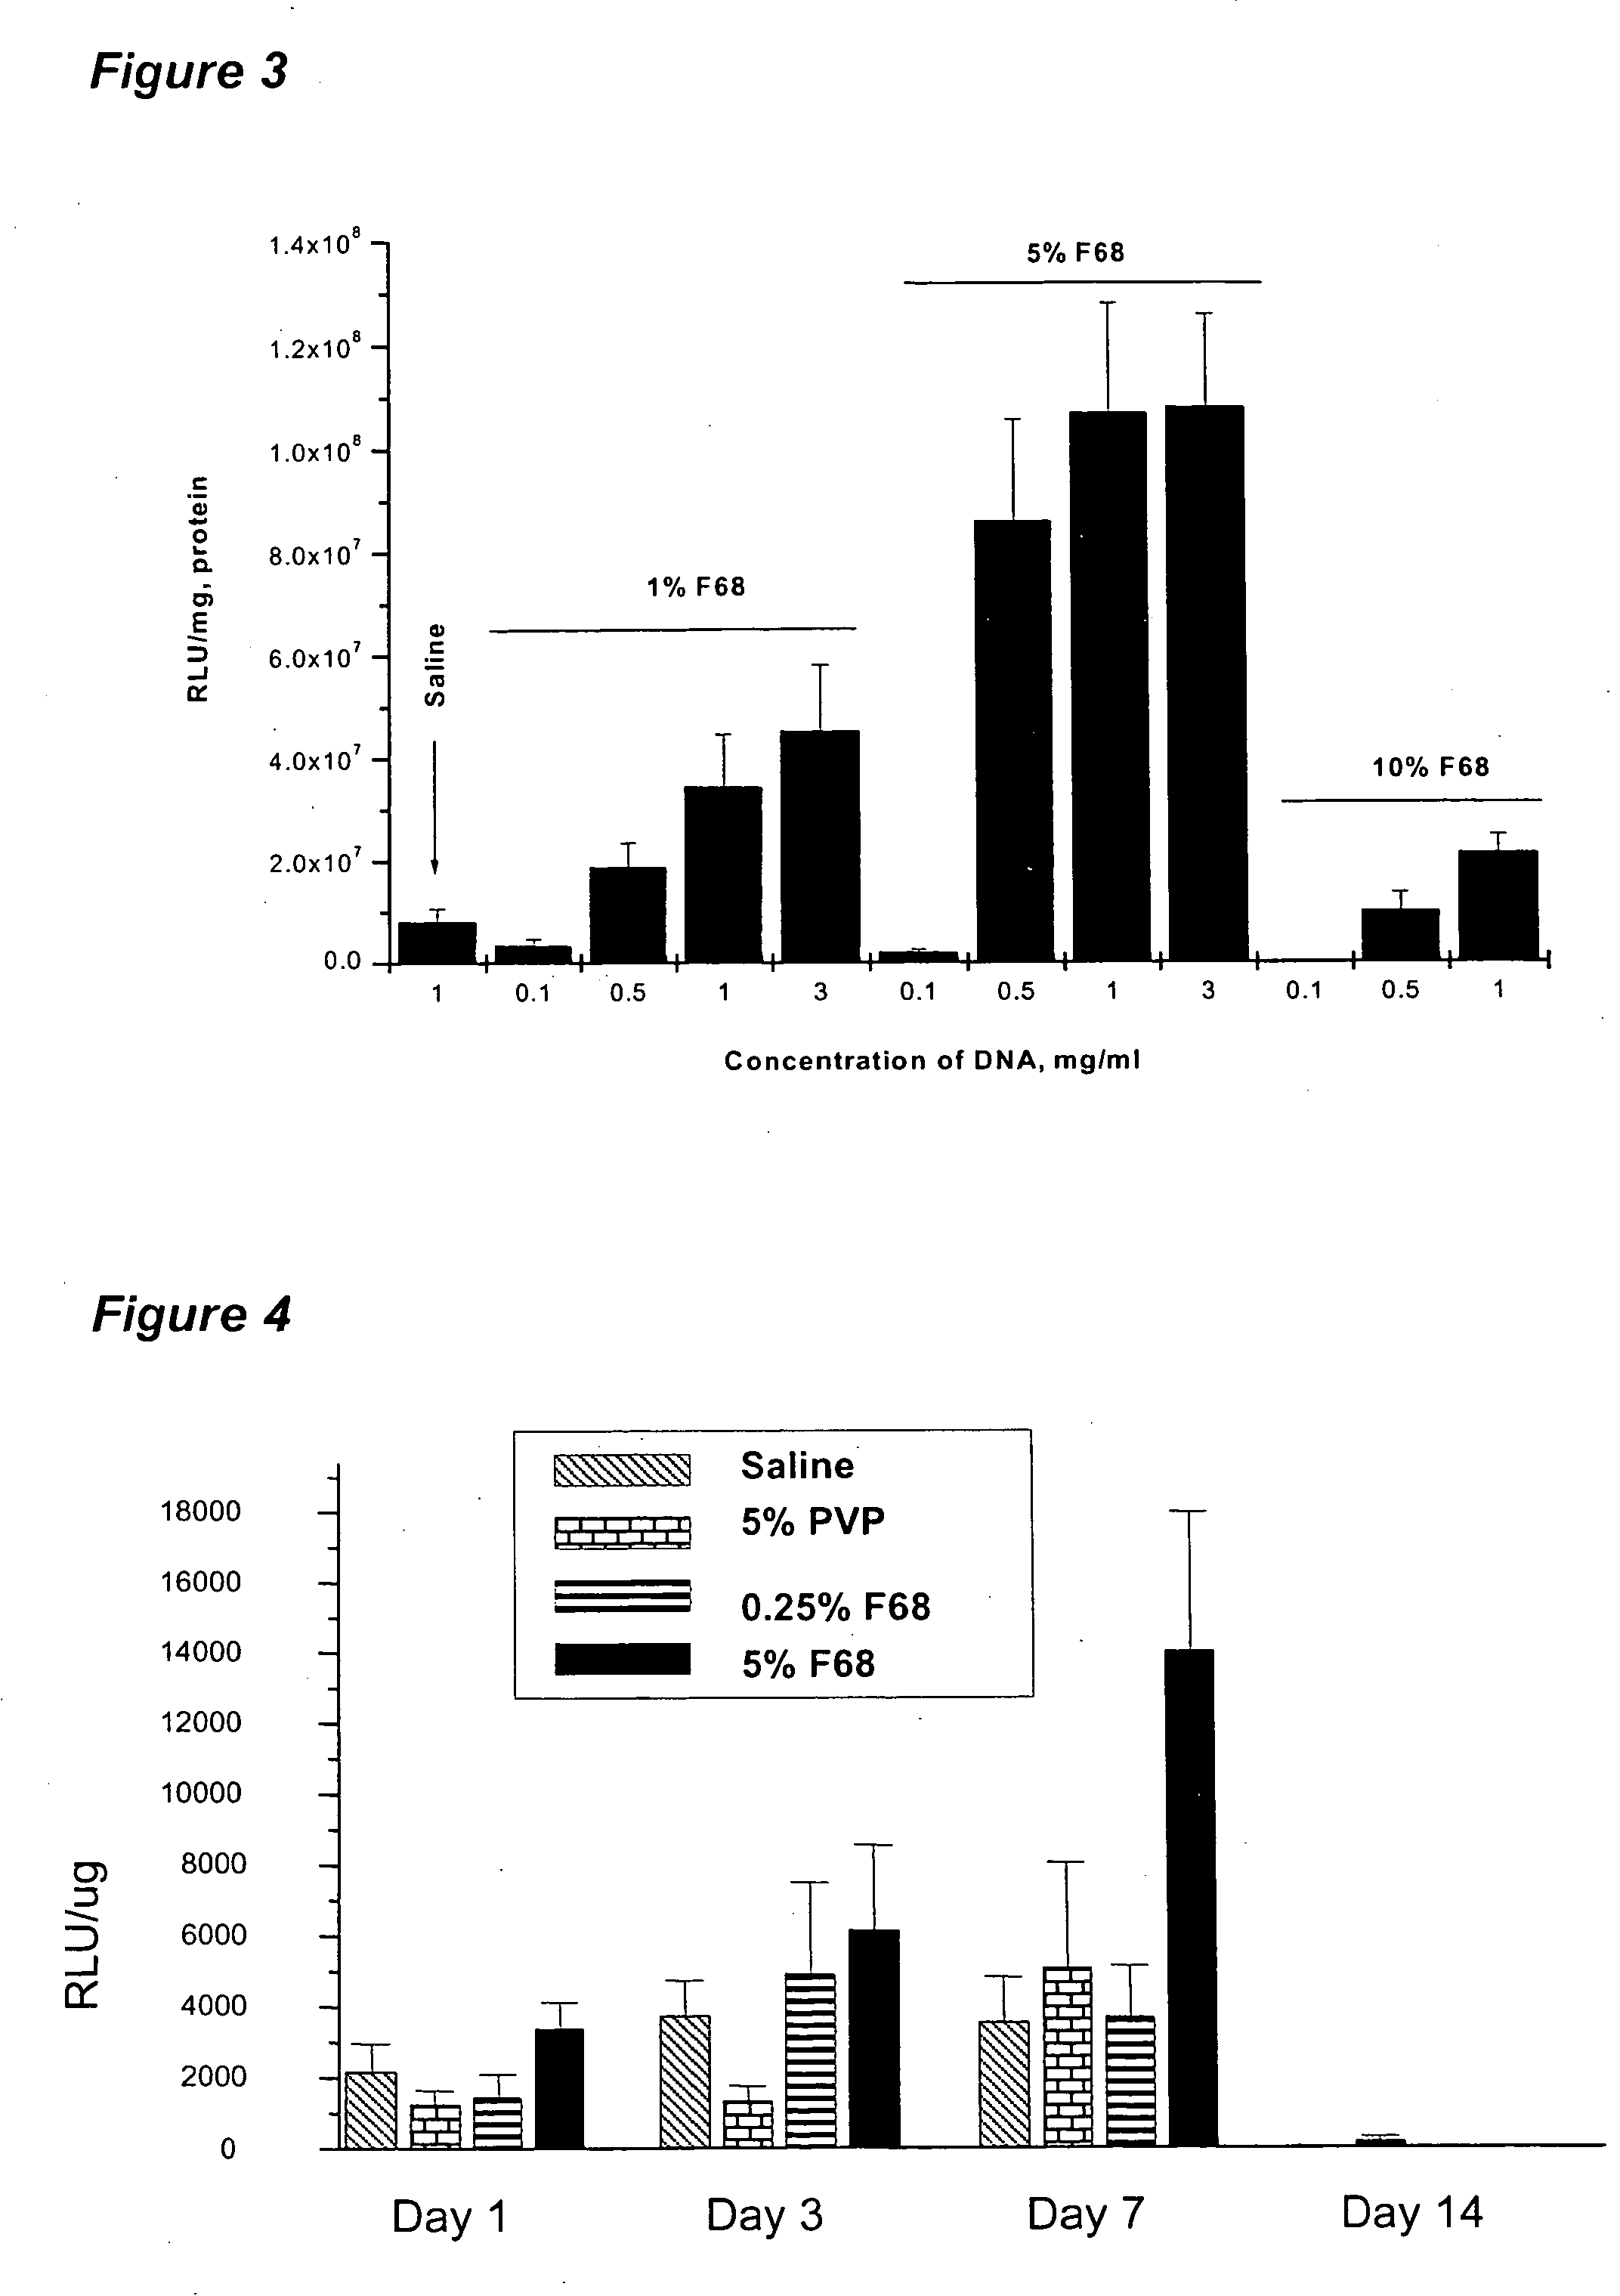 Poloxamer and poloxamine compositions for nucleic acid delivery